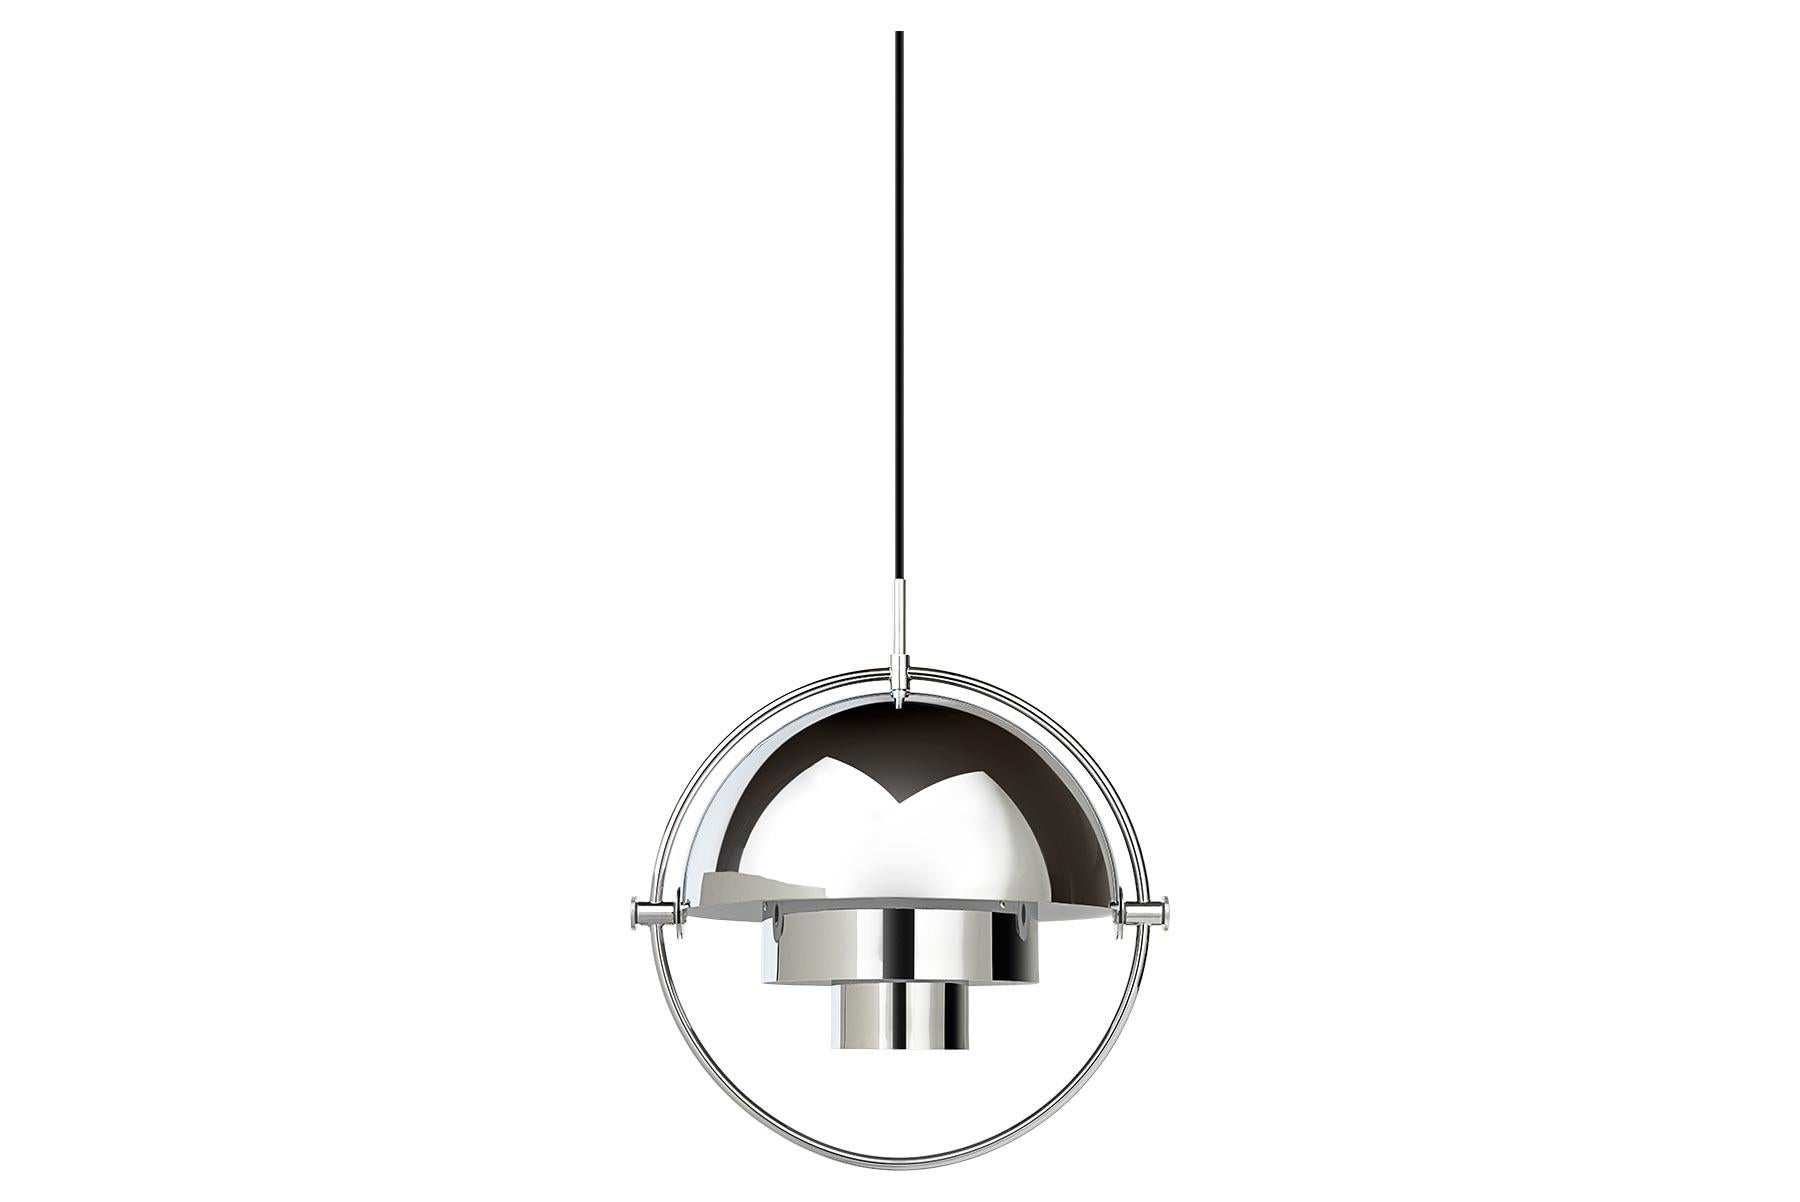 The Multi-Lite pendant embraces the golden era of Danish design with its characteristic shape of two opposing outside, mobile shades that enable creating a personal installation and a wide range of lighting values in a room. By individually rotating